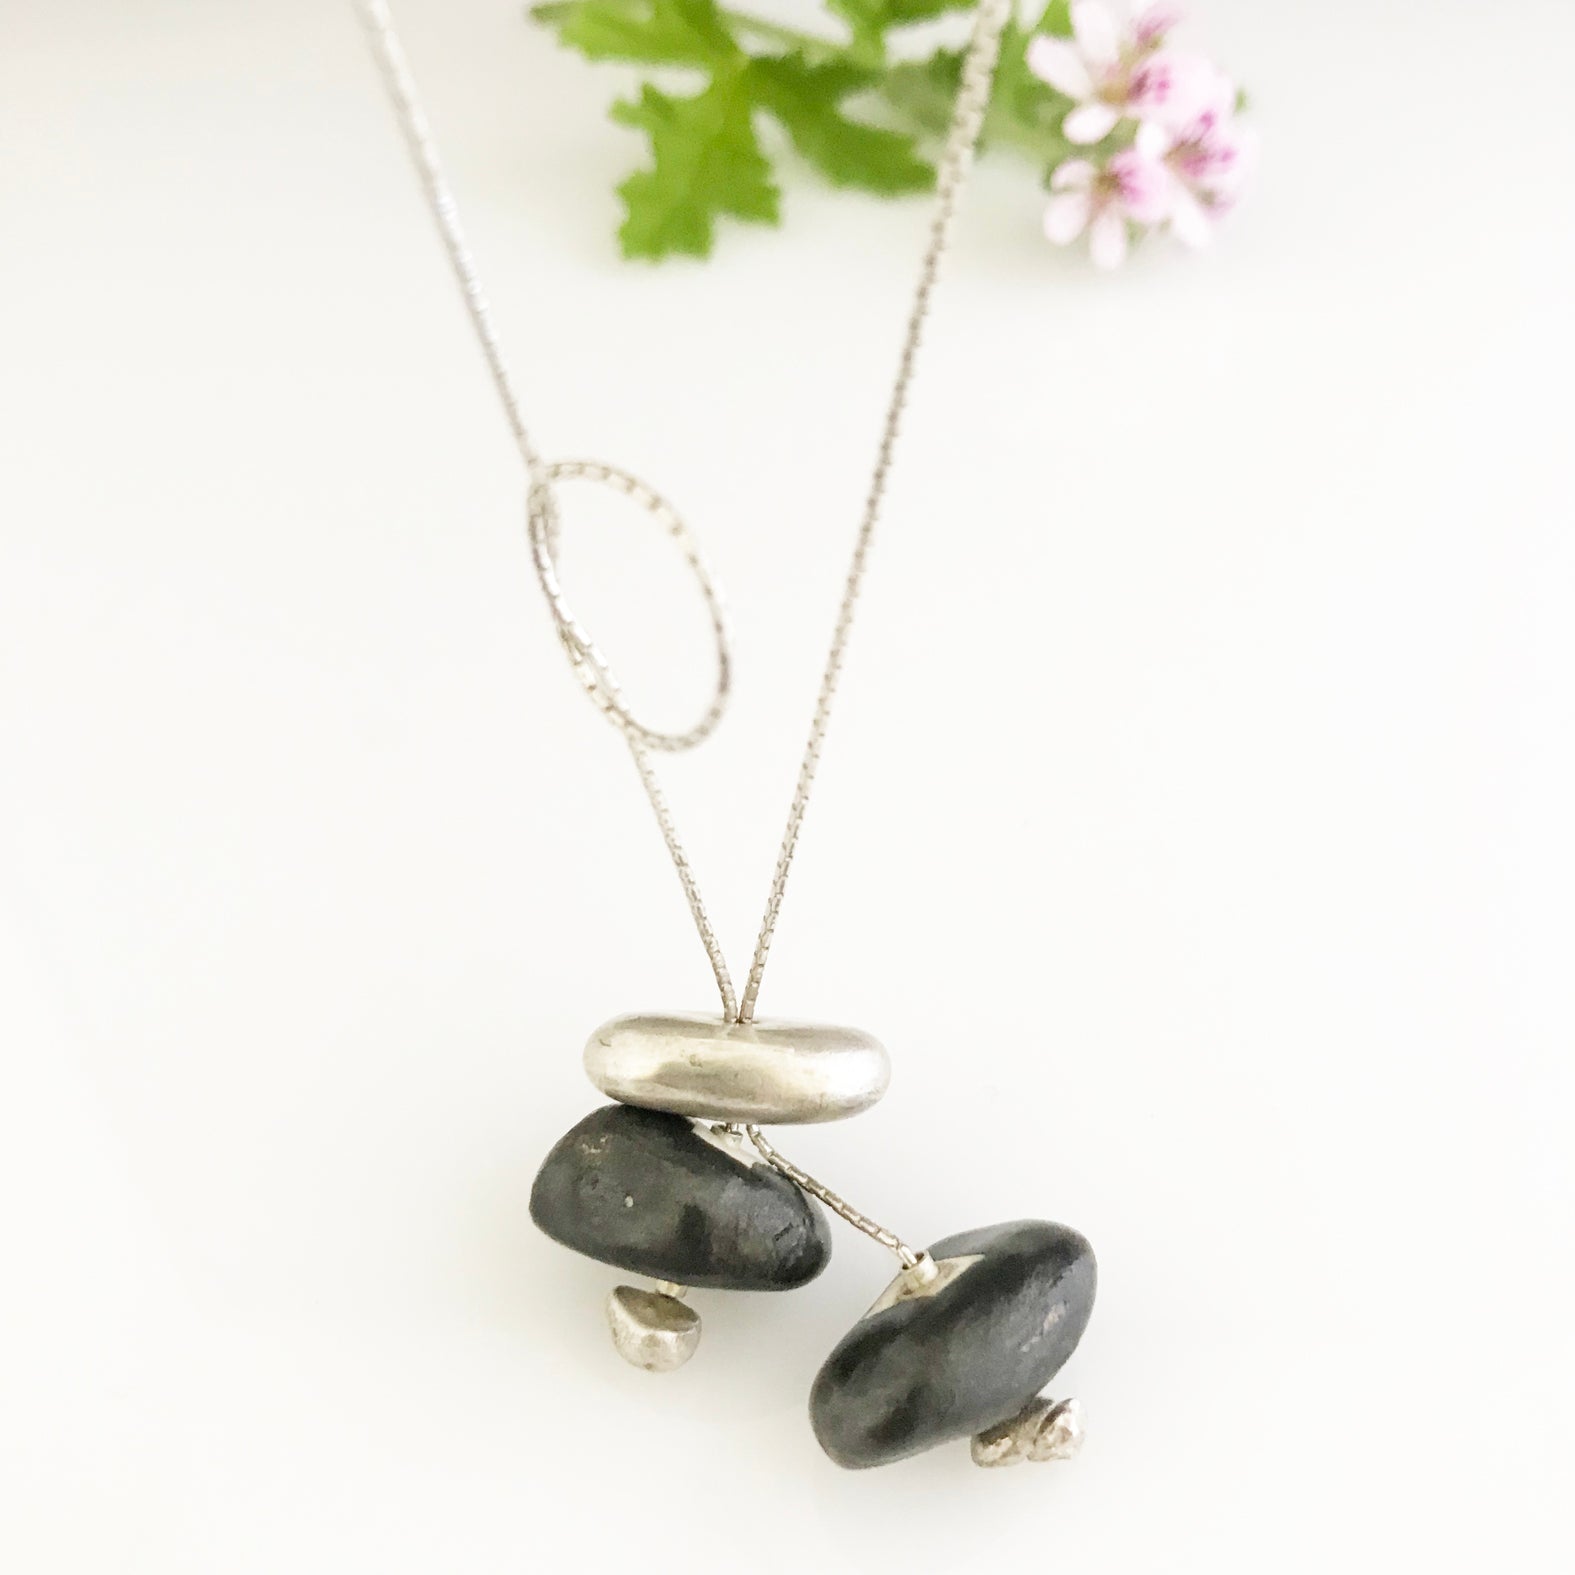 Silver necklace with silver and black porcelain stone shaped components